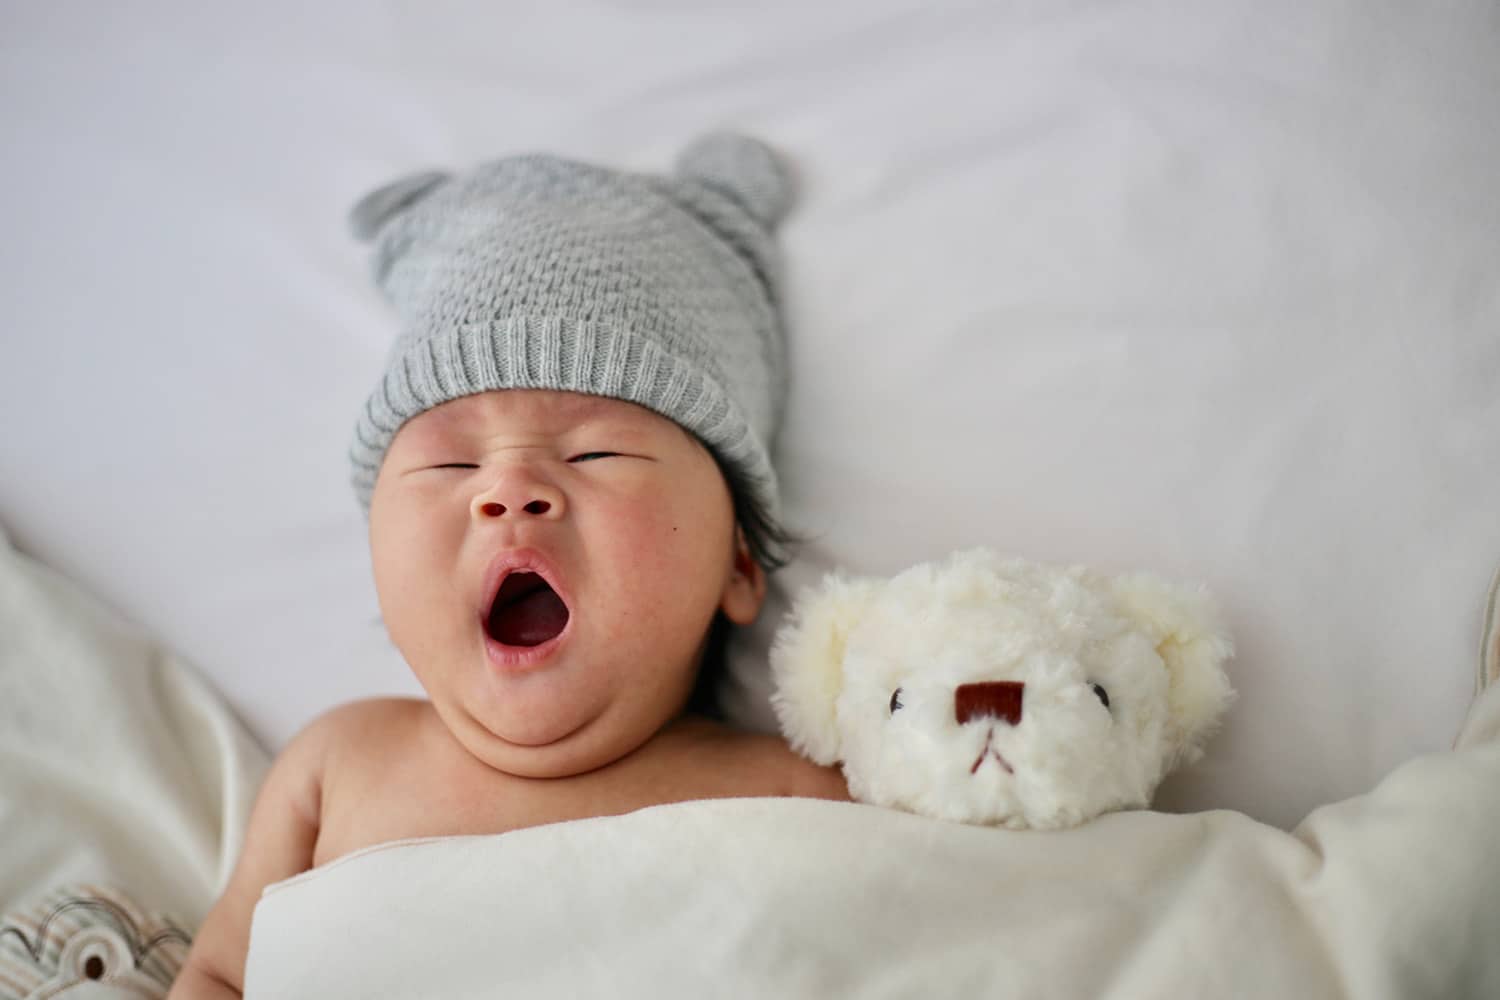 A baby yawns while holding a teddy bear.